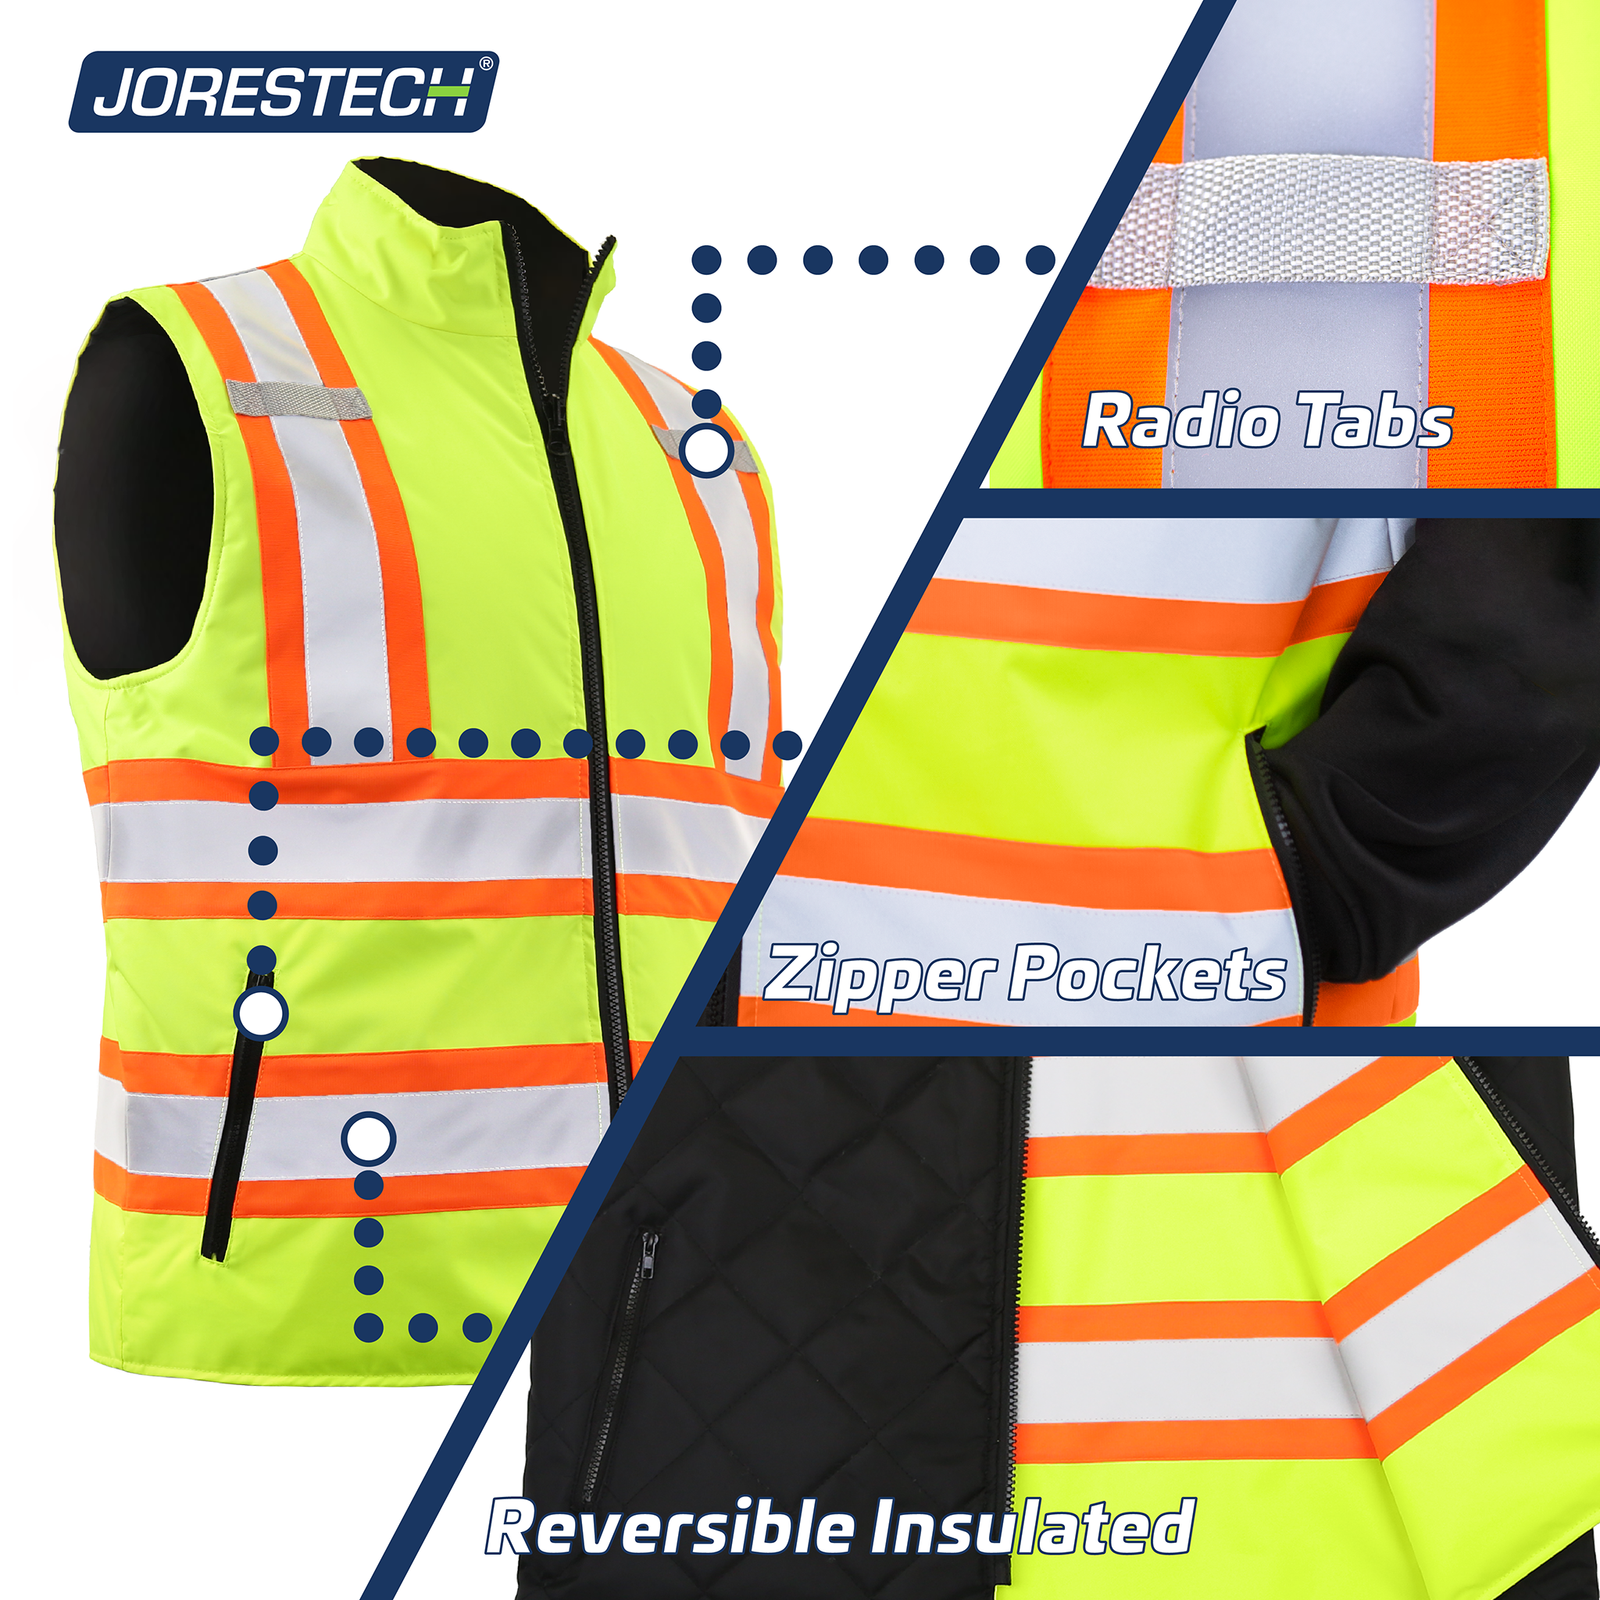 Showing a yellow JORESTECH insulated safety vest and close ups featuring the radio tabs, the reversible insulated material and the waist zippered pockets